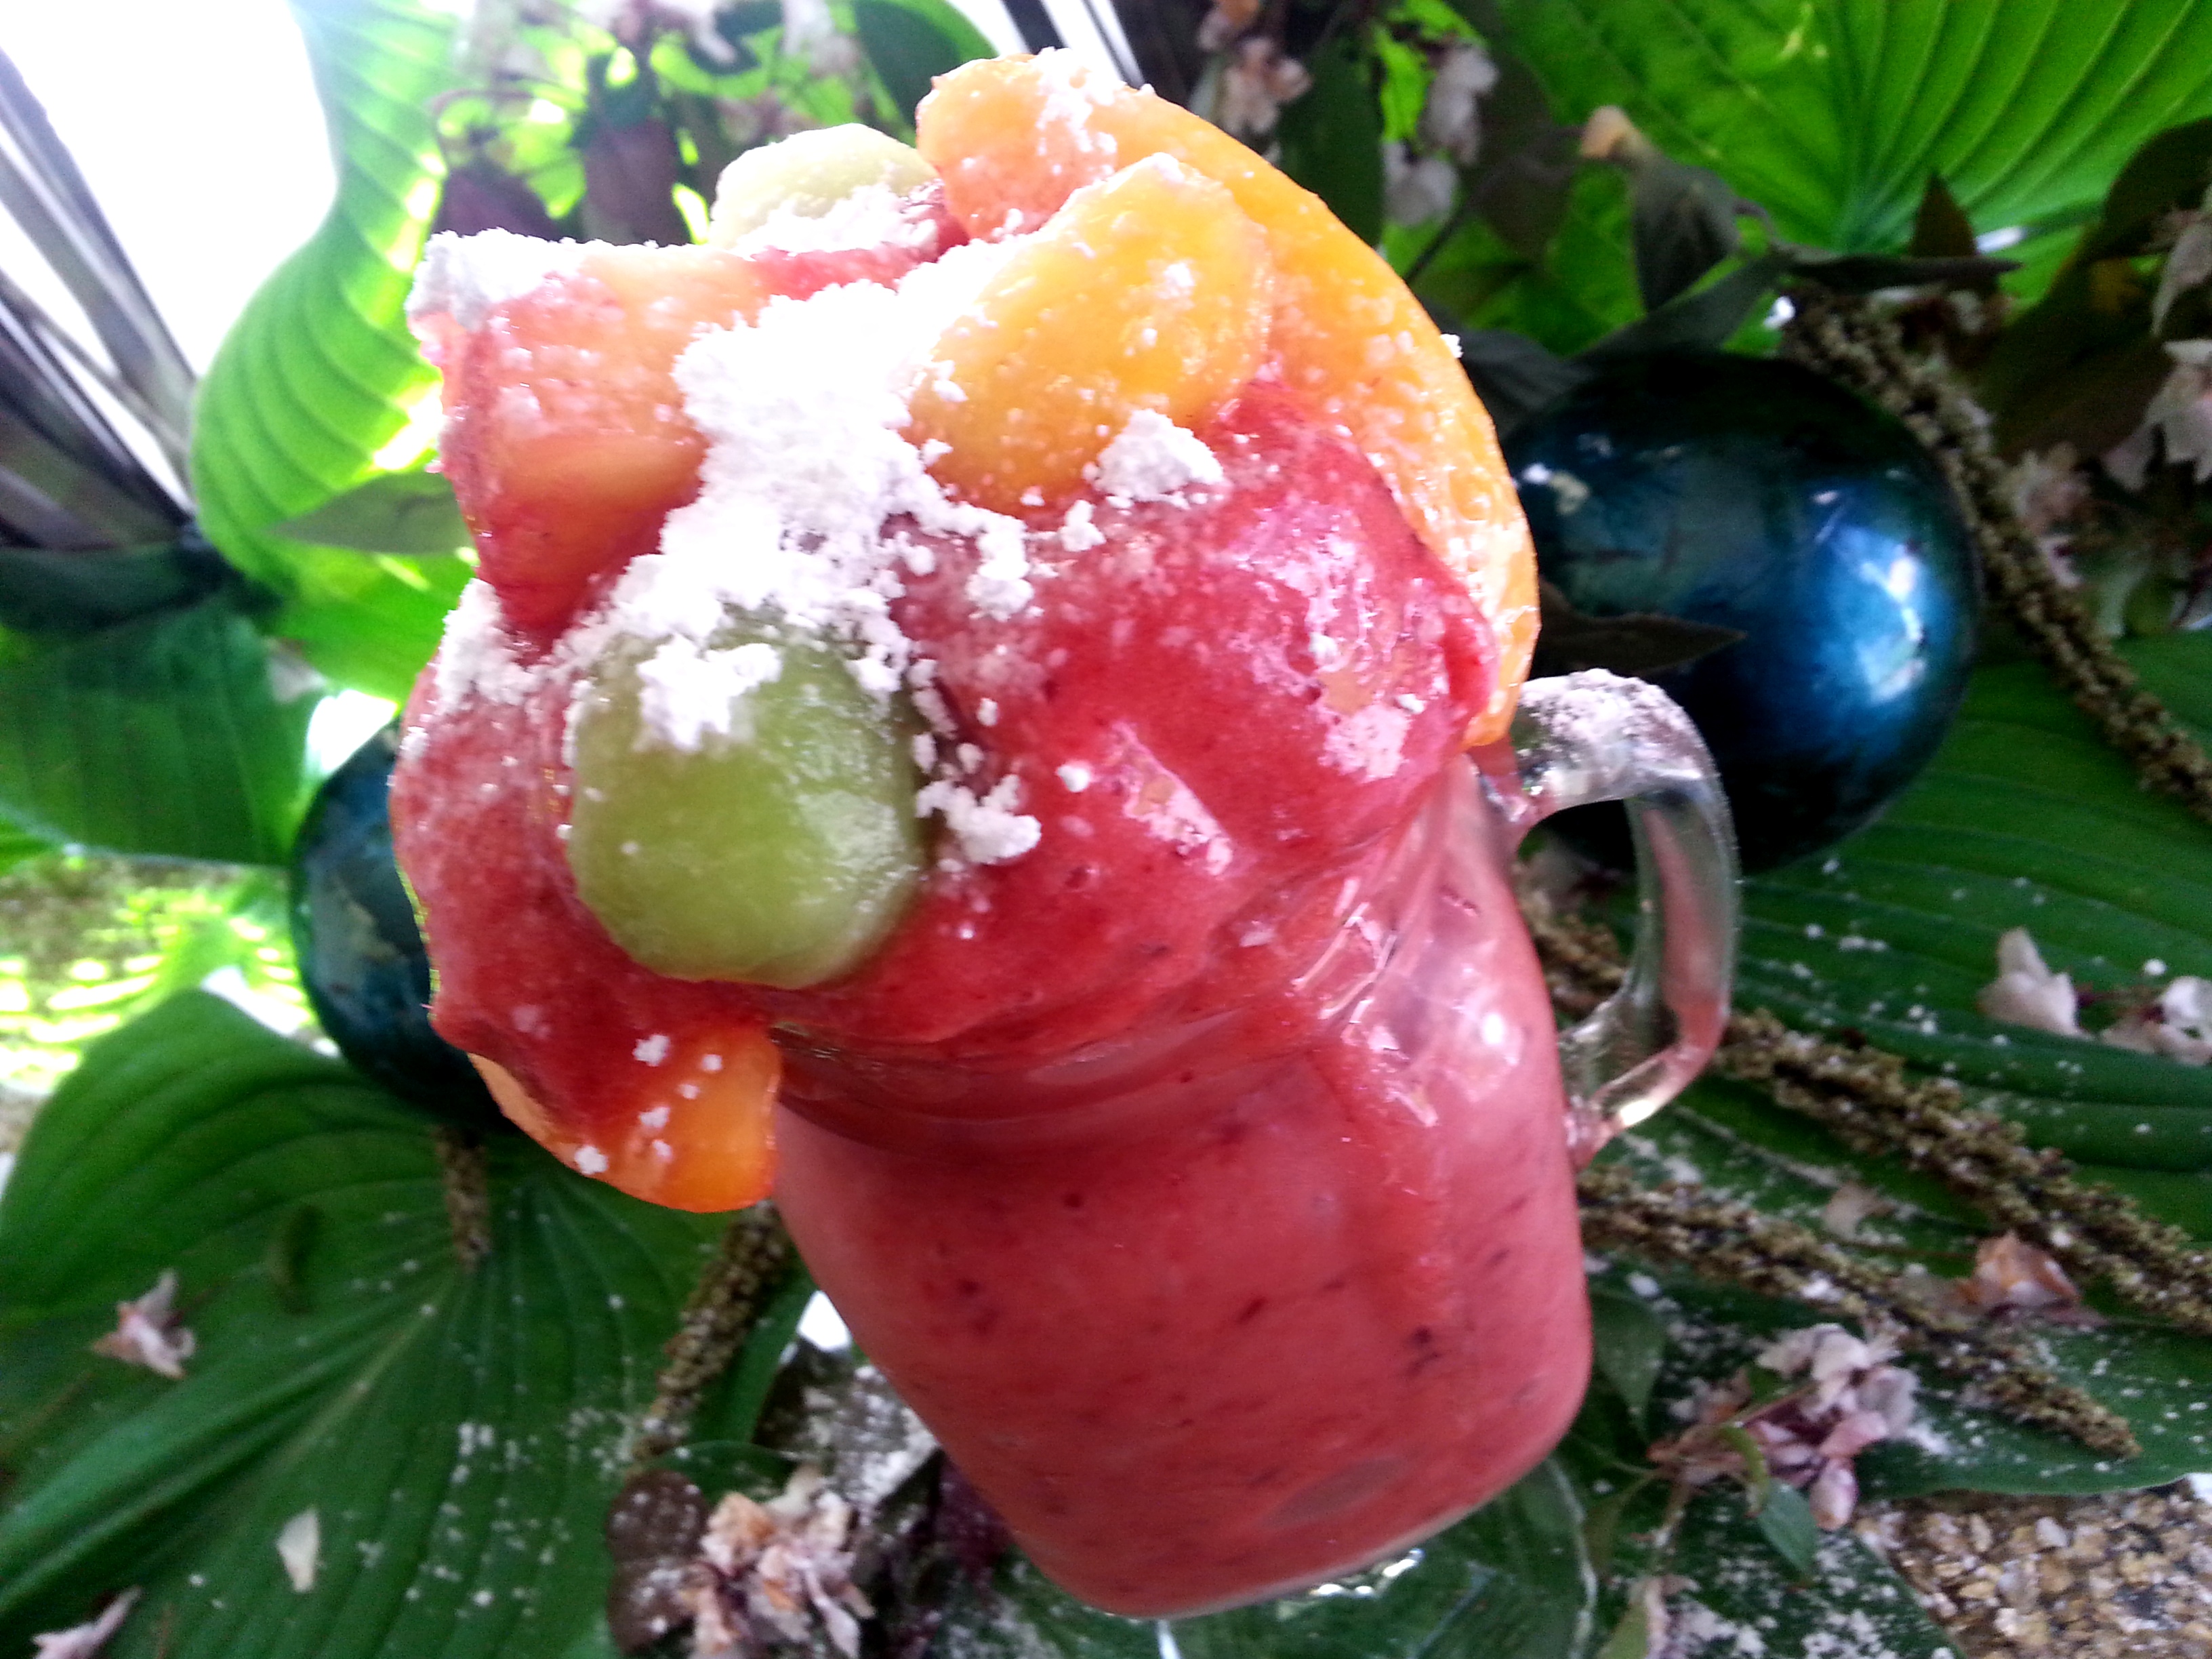 Mixed Frozen Fruits Smoothie